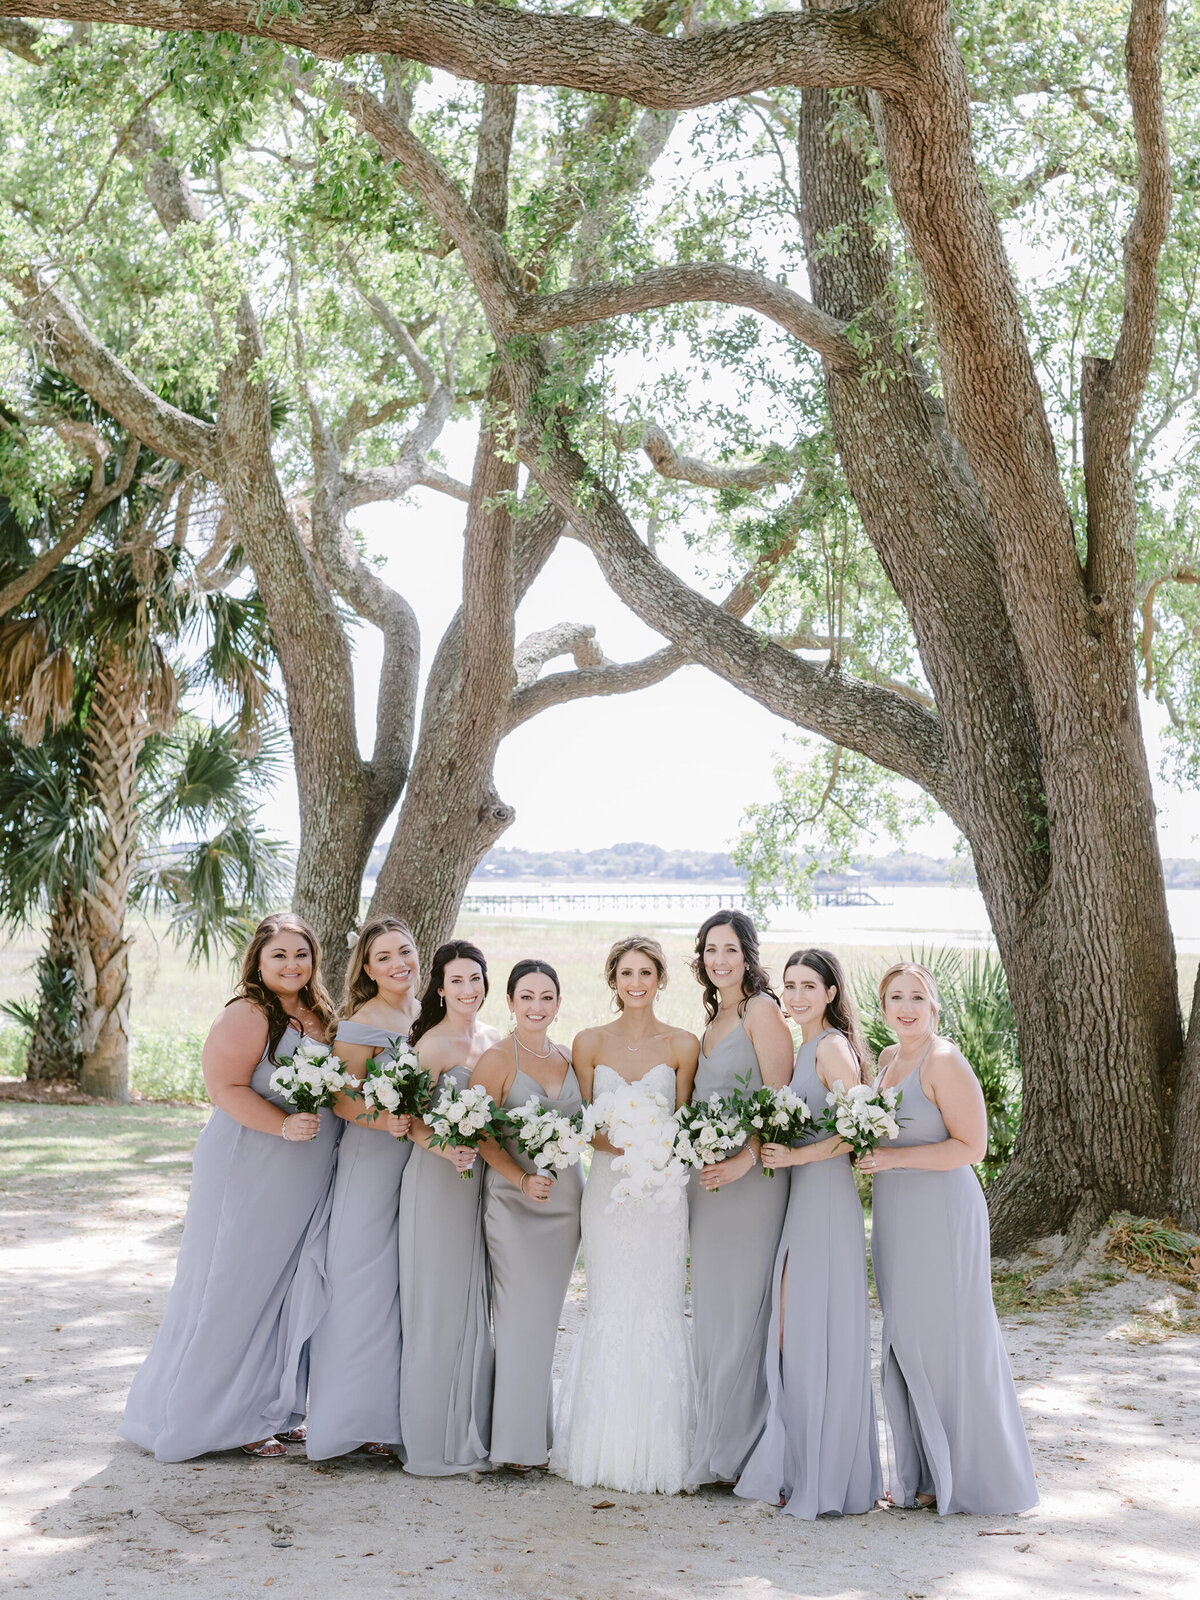 Rebecca + Joe | Tented Wedding at Lowndes Grove by Pure Luxe Bride: Charleston Wedding and Event Planners